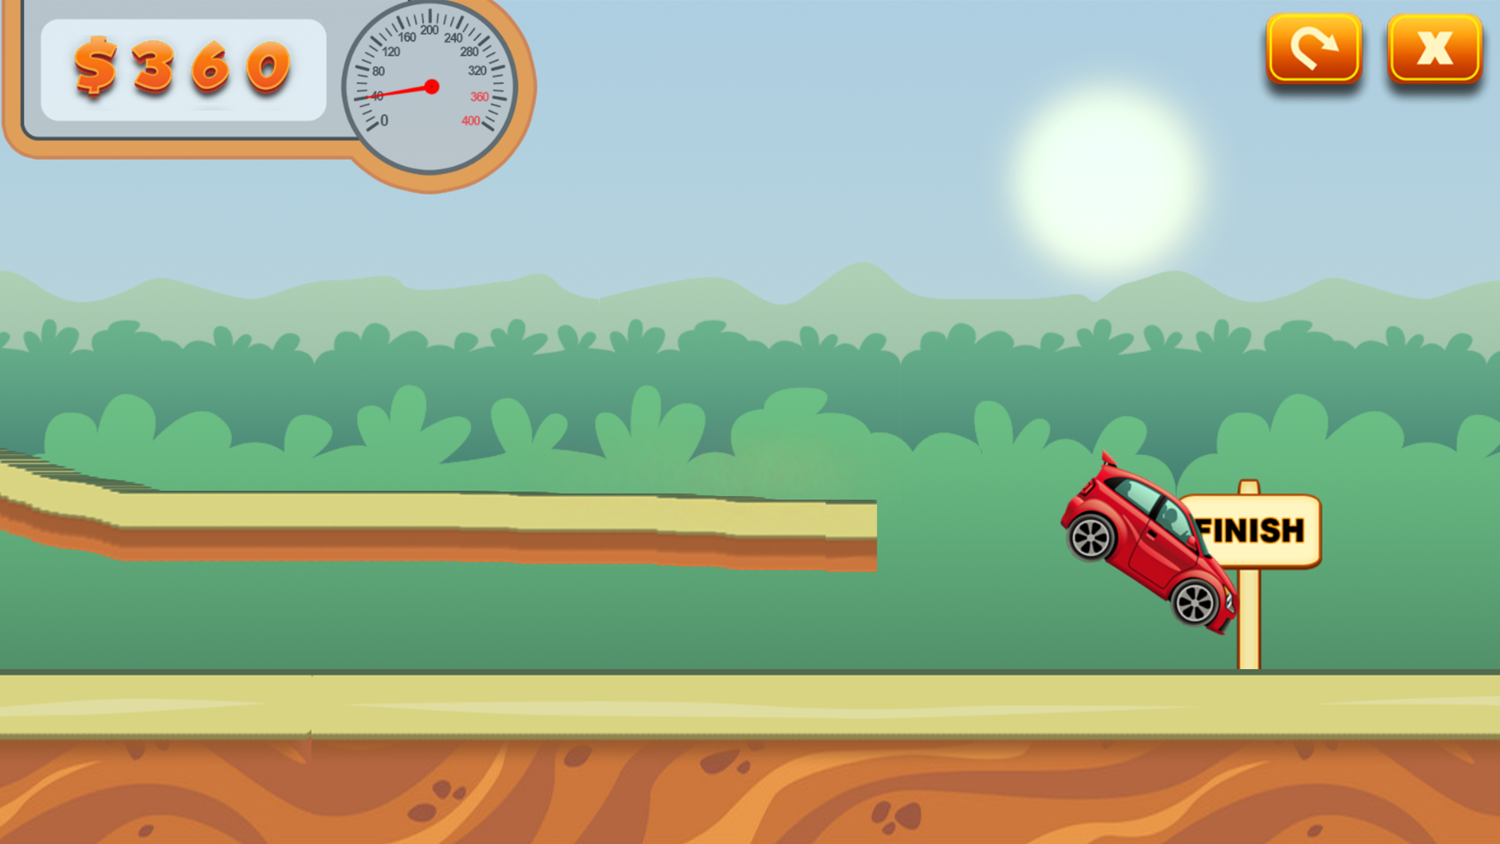 Fun Racer Drawing Path Game Level Complete Screenshot.